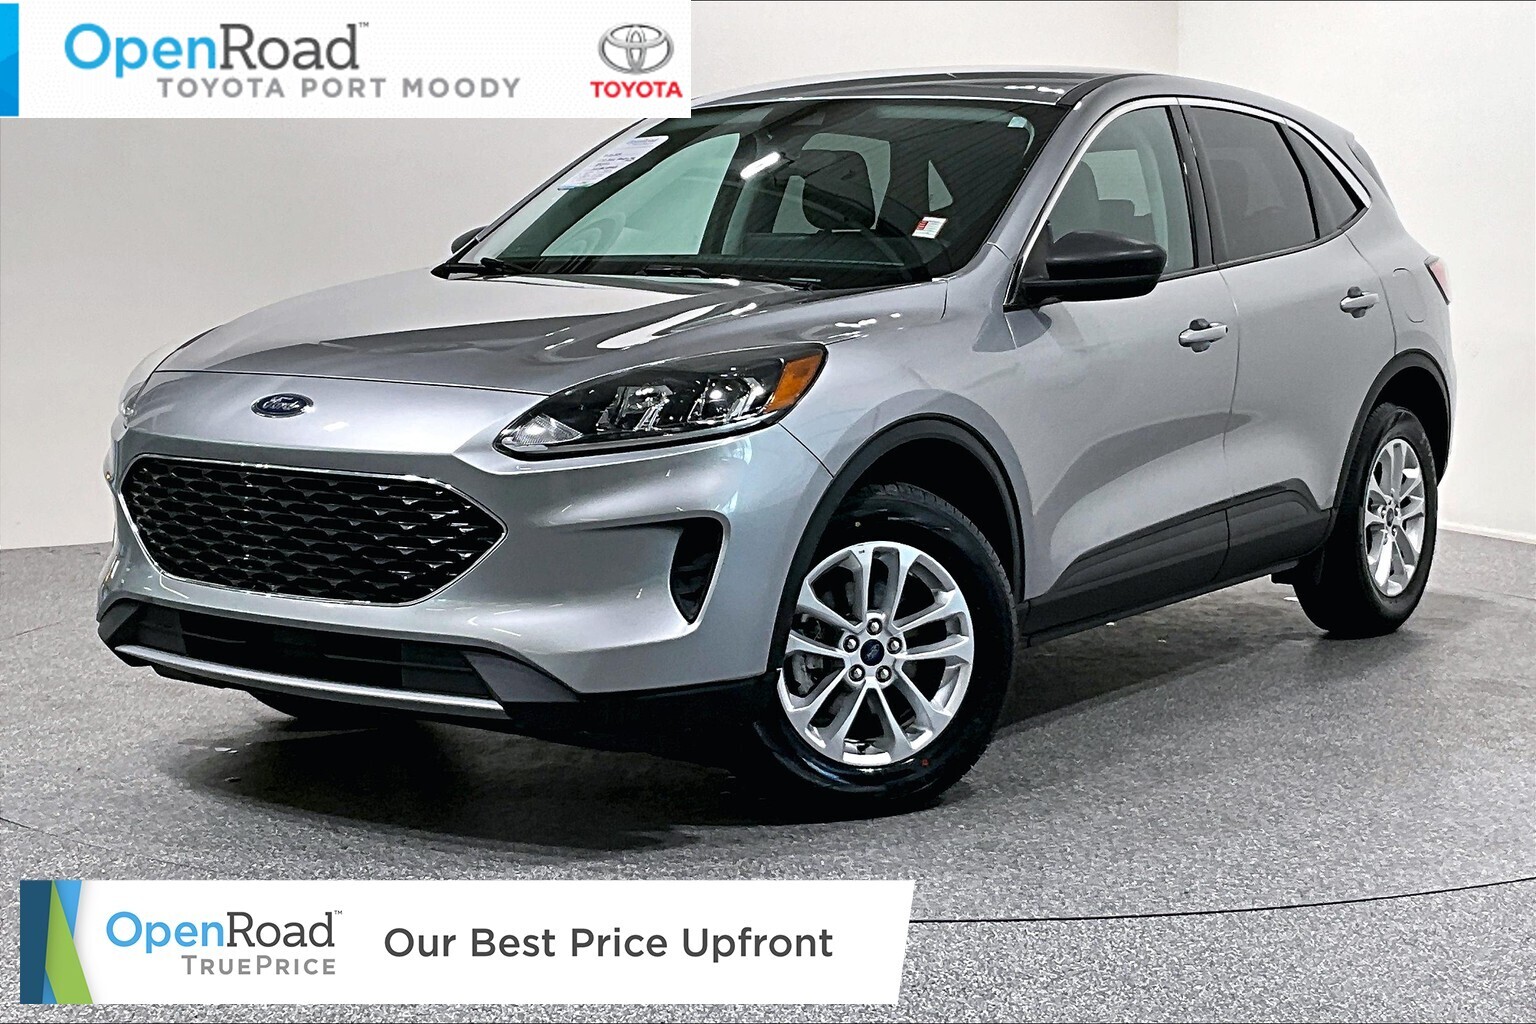 2022 Ford Escape SE AWD |OpenRoad True Price |One Owner |No Claims